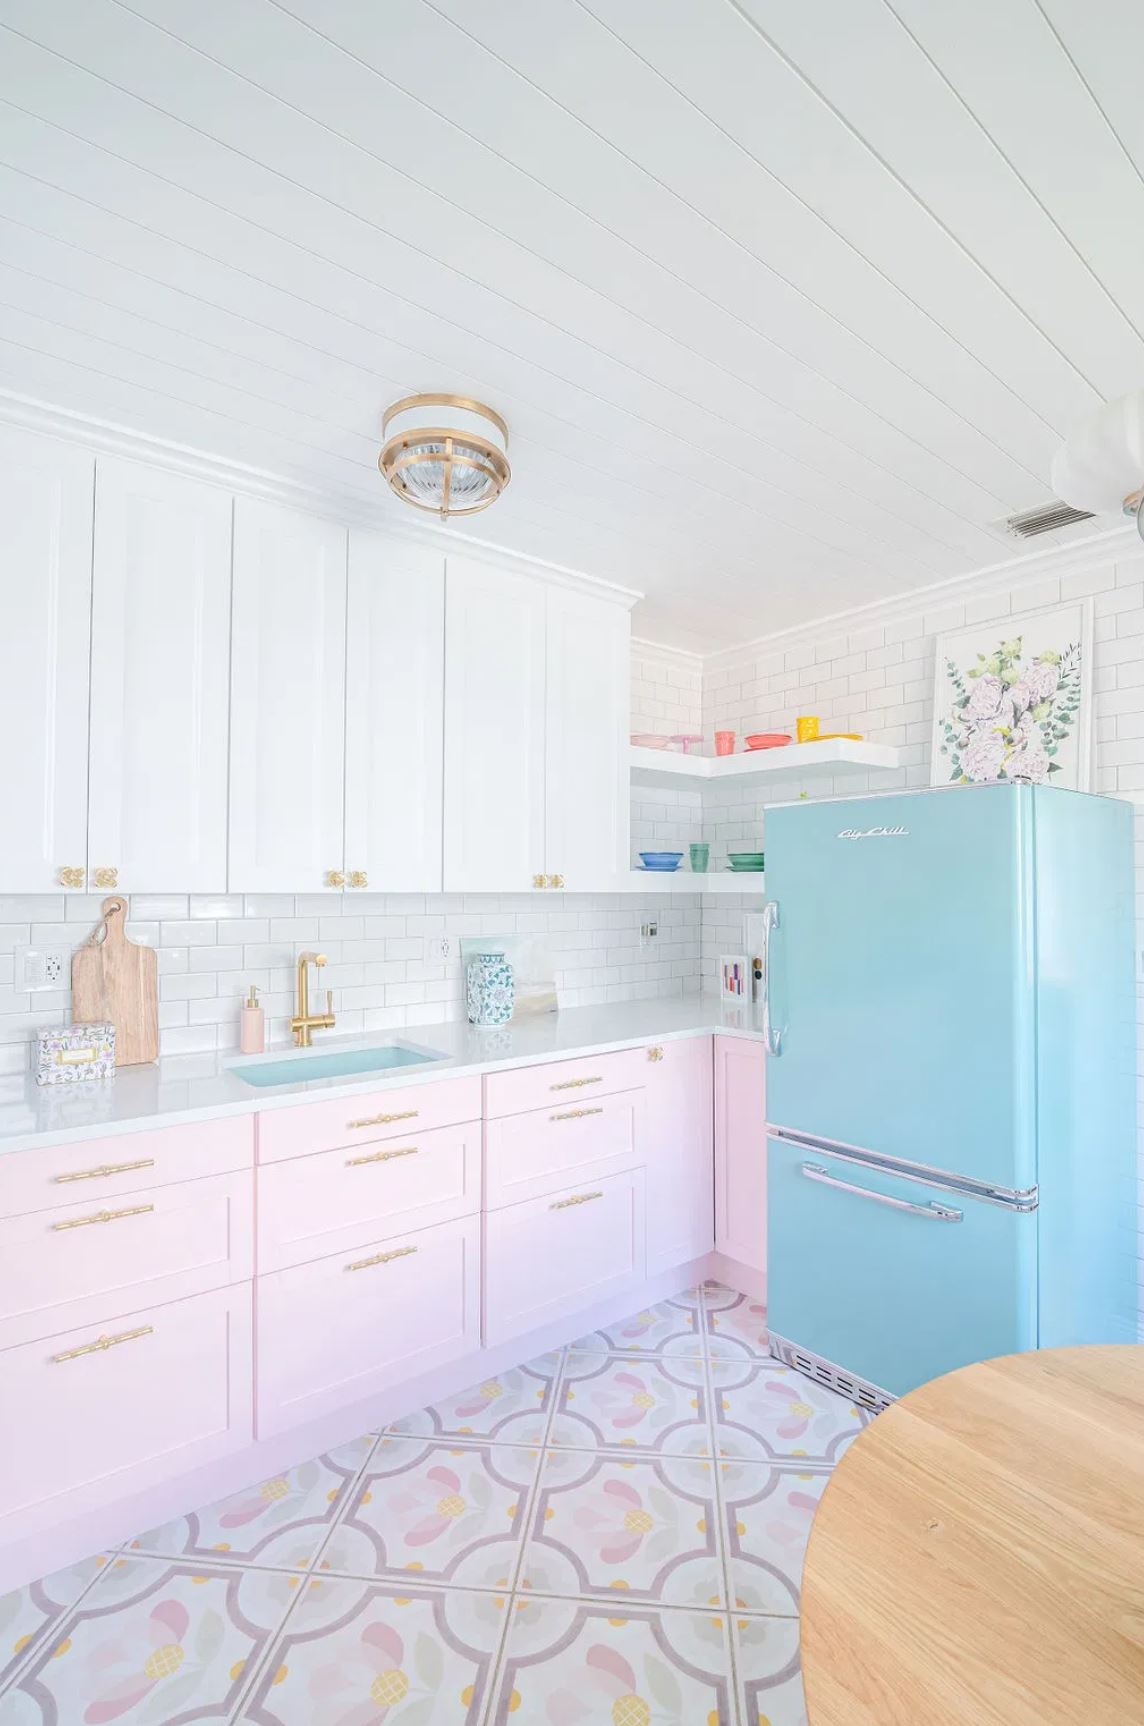 Pink painted cabinets, a colorful floor, bright blue fridge, and white cabinets and subway tile in a custom kitchen.